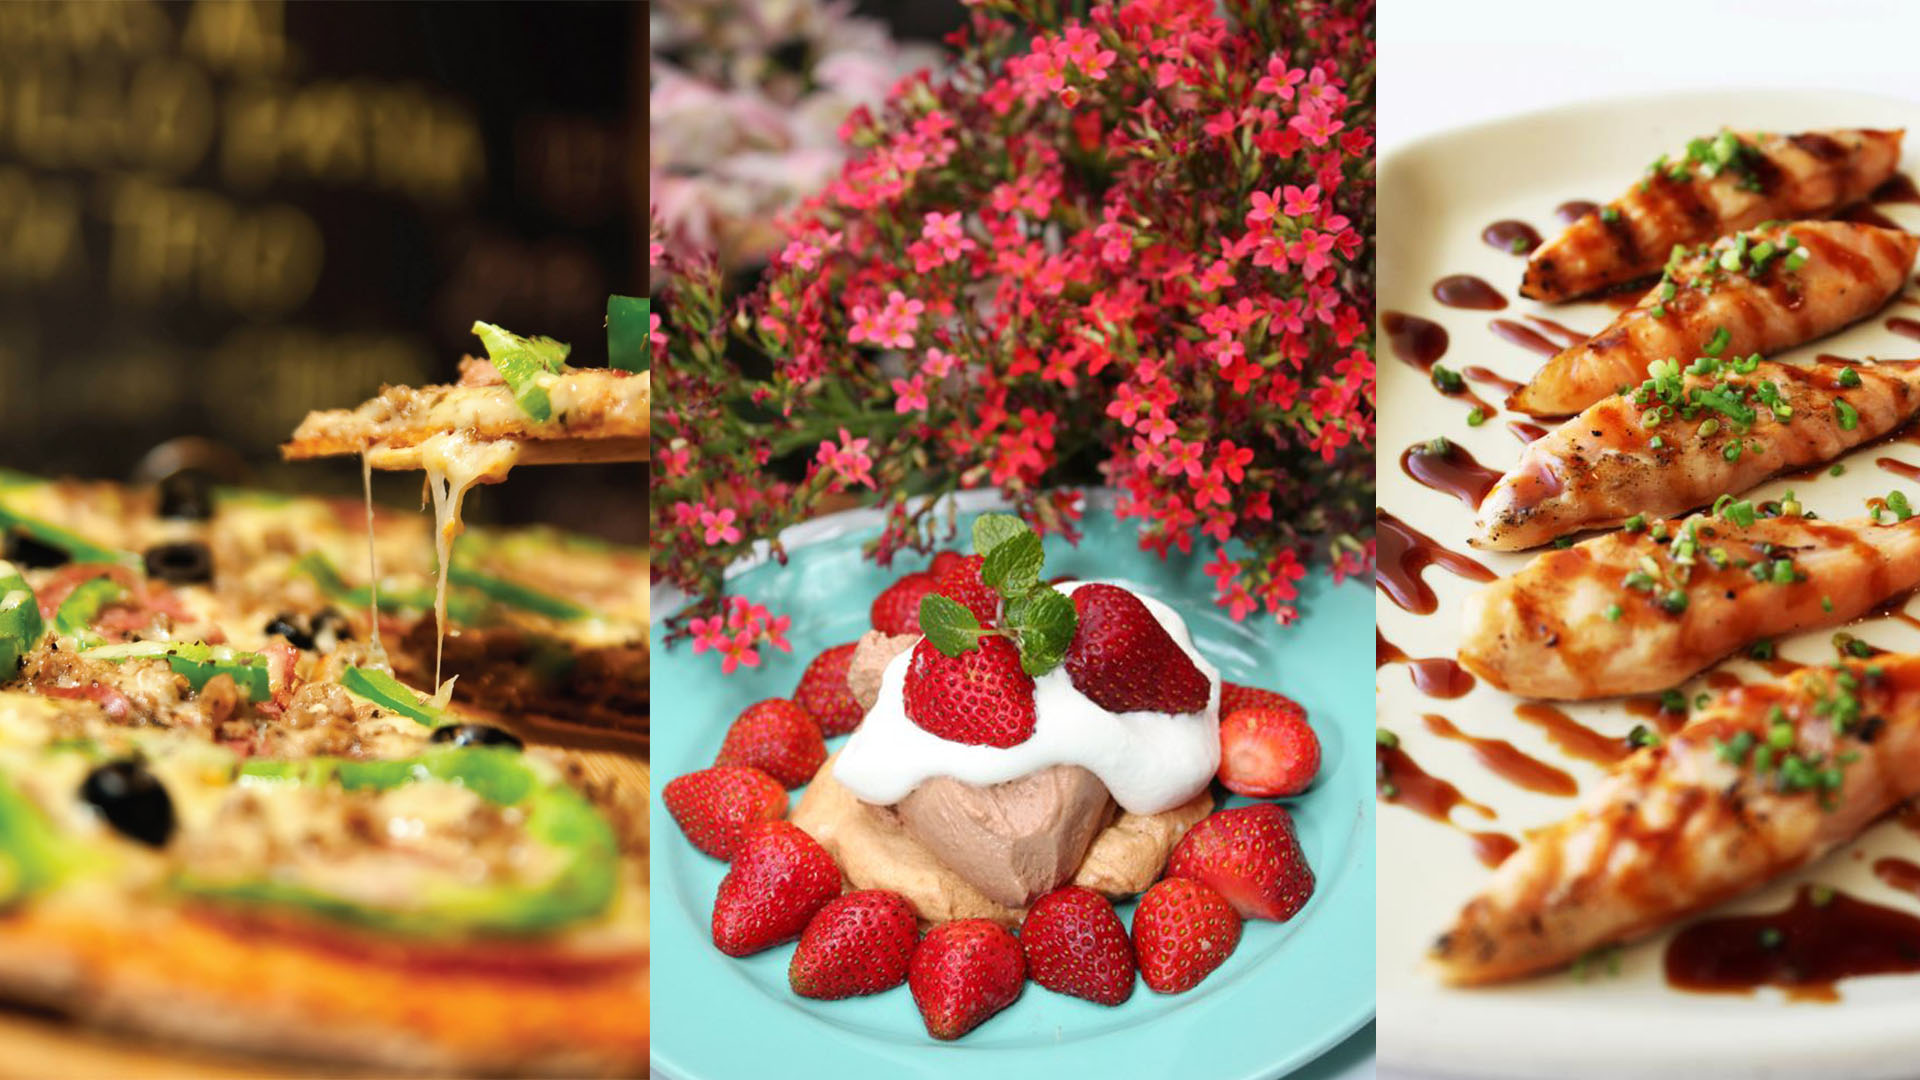 8 RESTAURANTS TO TREAT YOUR MOM THIS MOTHER'S DAY